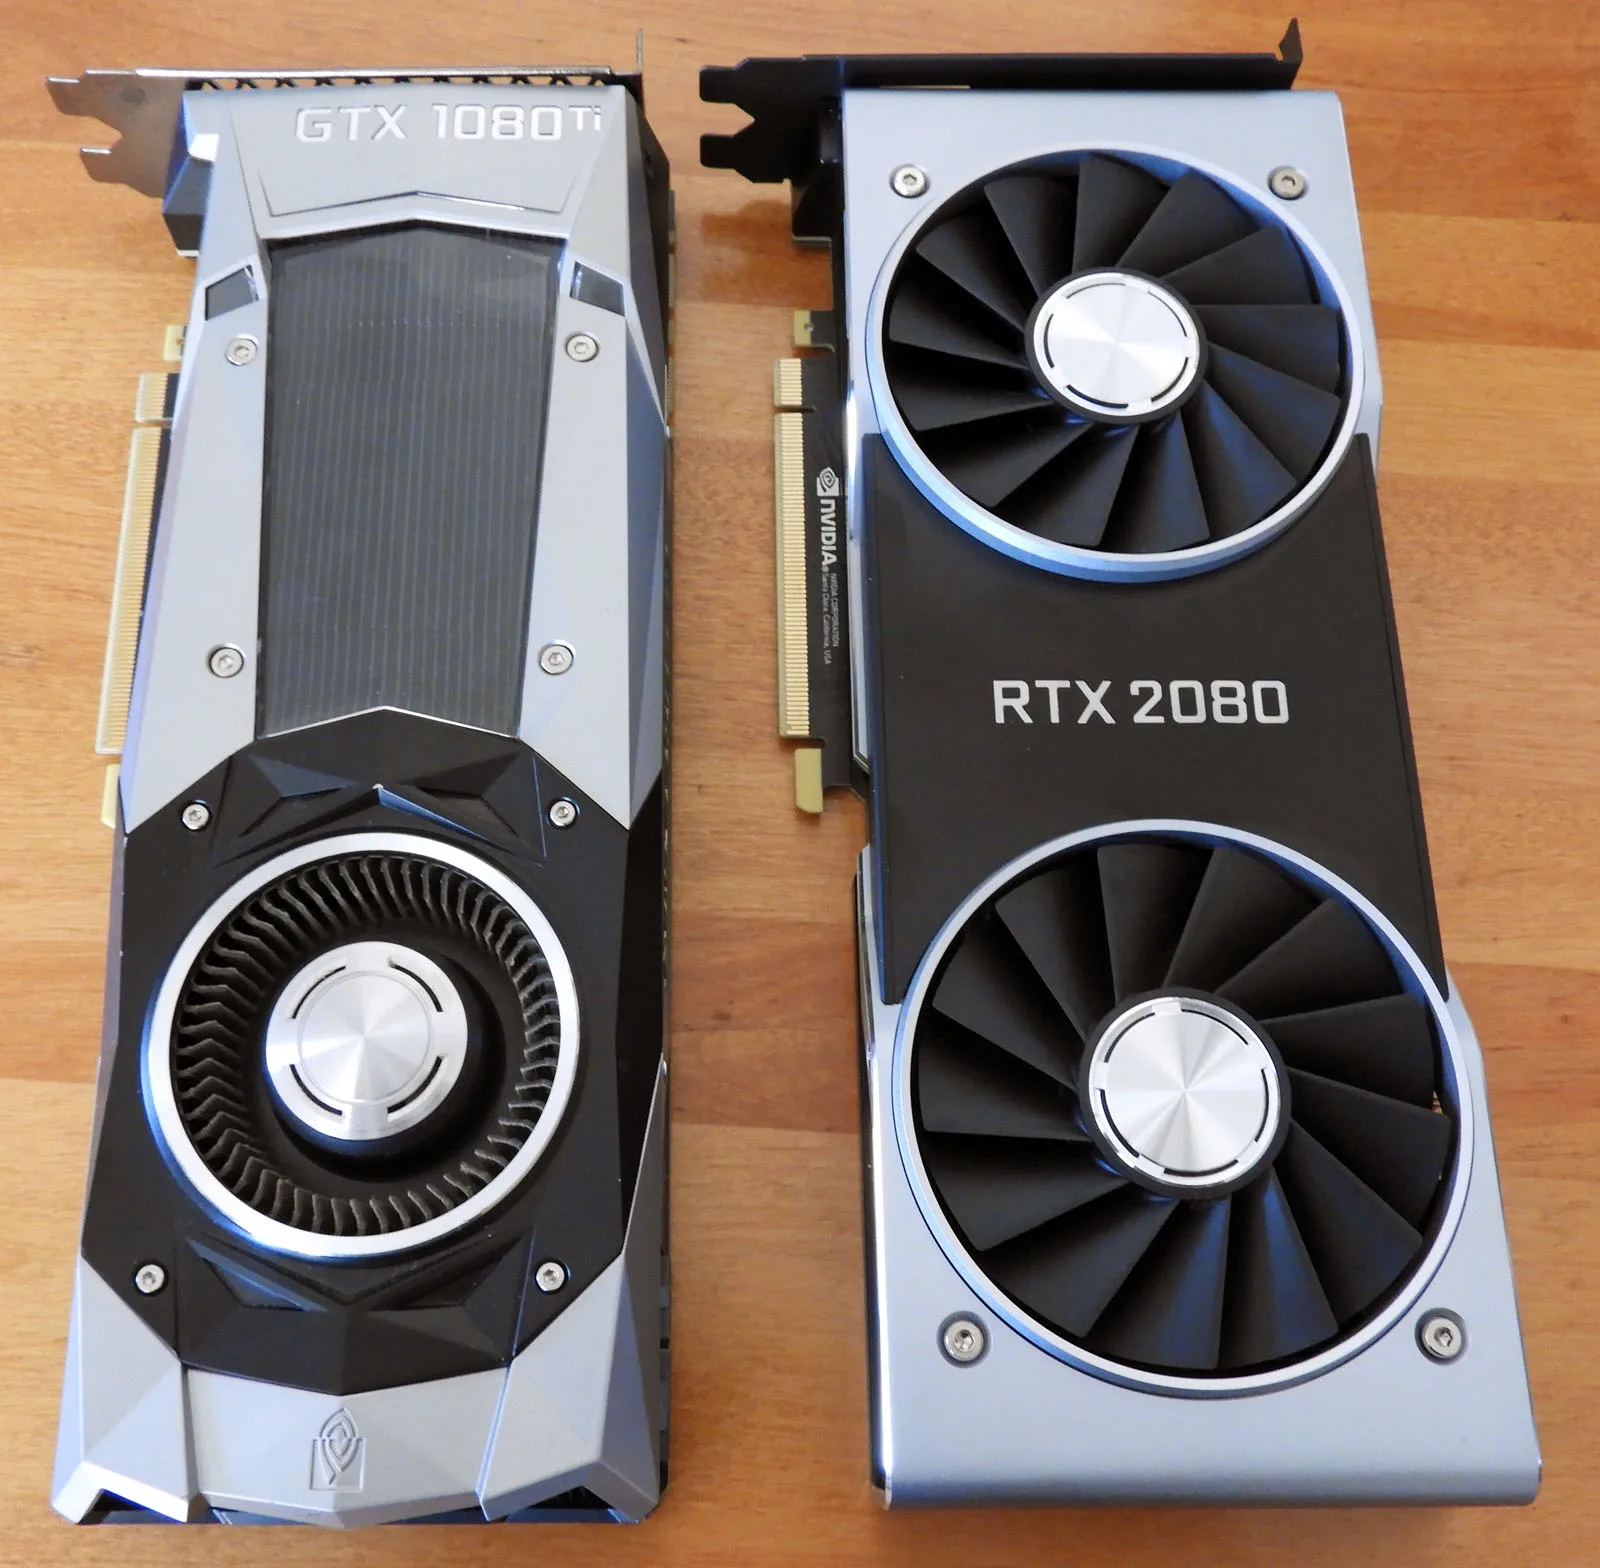 The RTX 2080 vs. the GTX 1080 Ti in VR, Revisited – BabelTechReviews